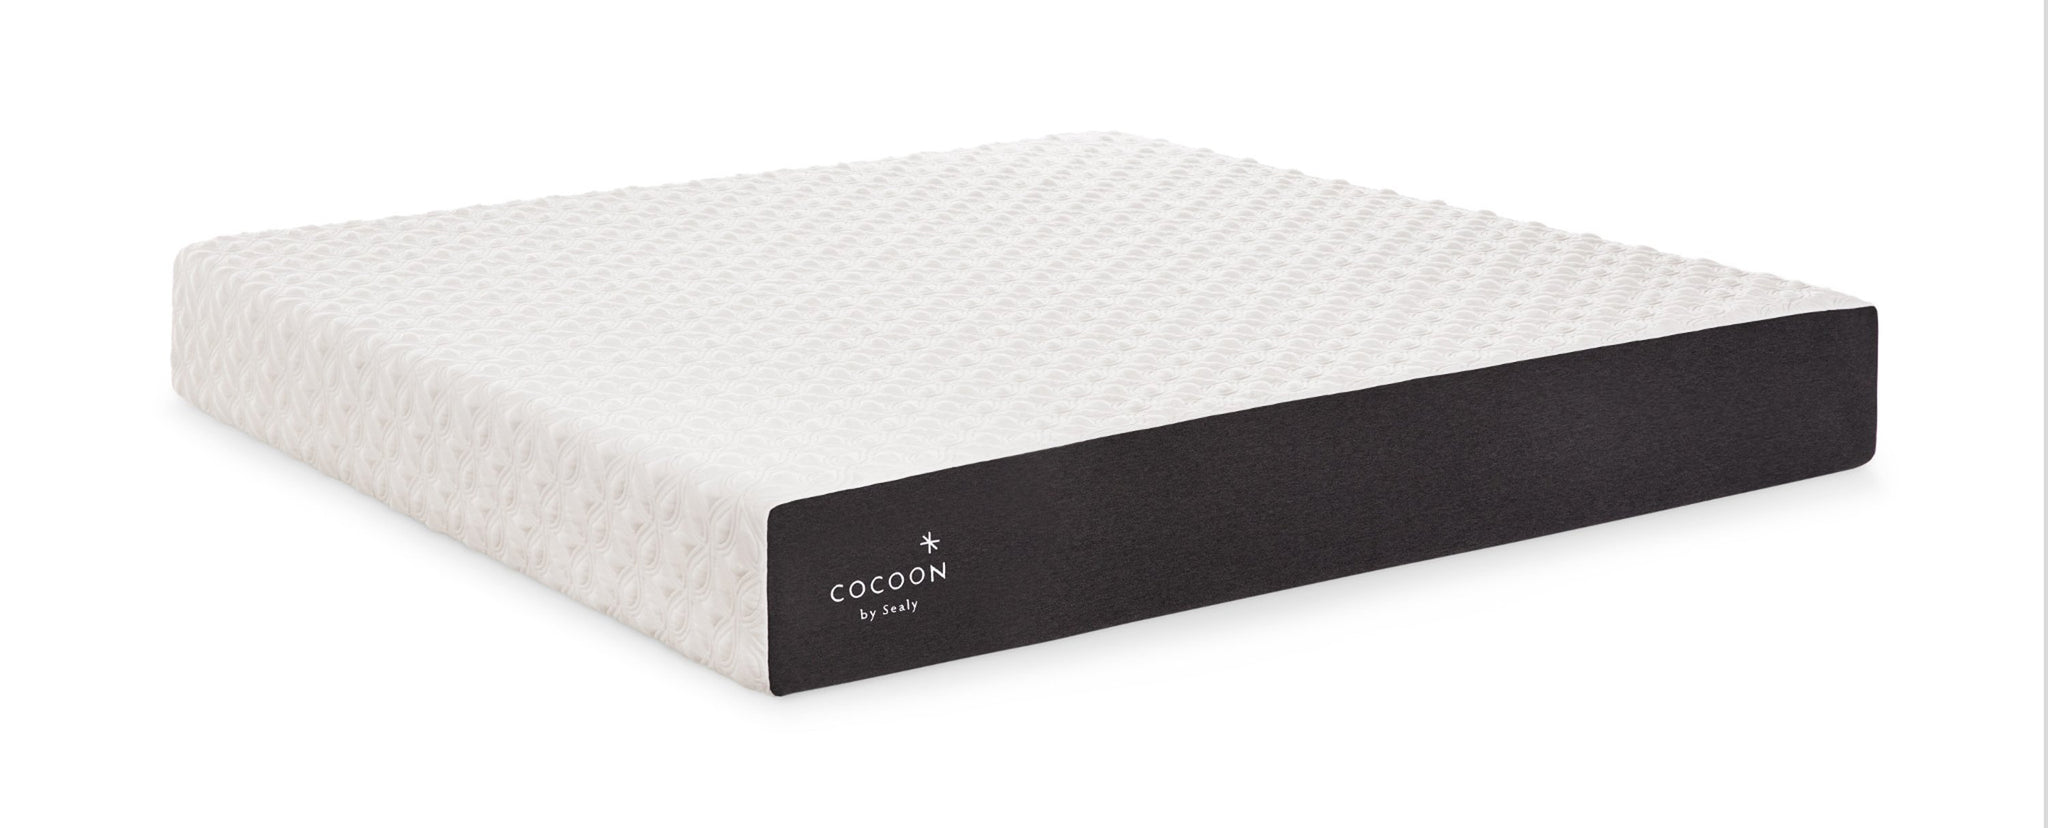 Picture of Cocoon Mattress by Sealy - Queen - 8" Thickness